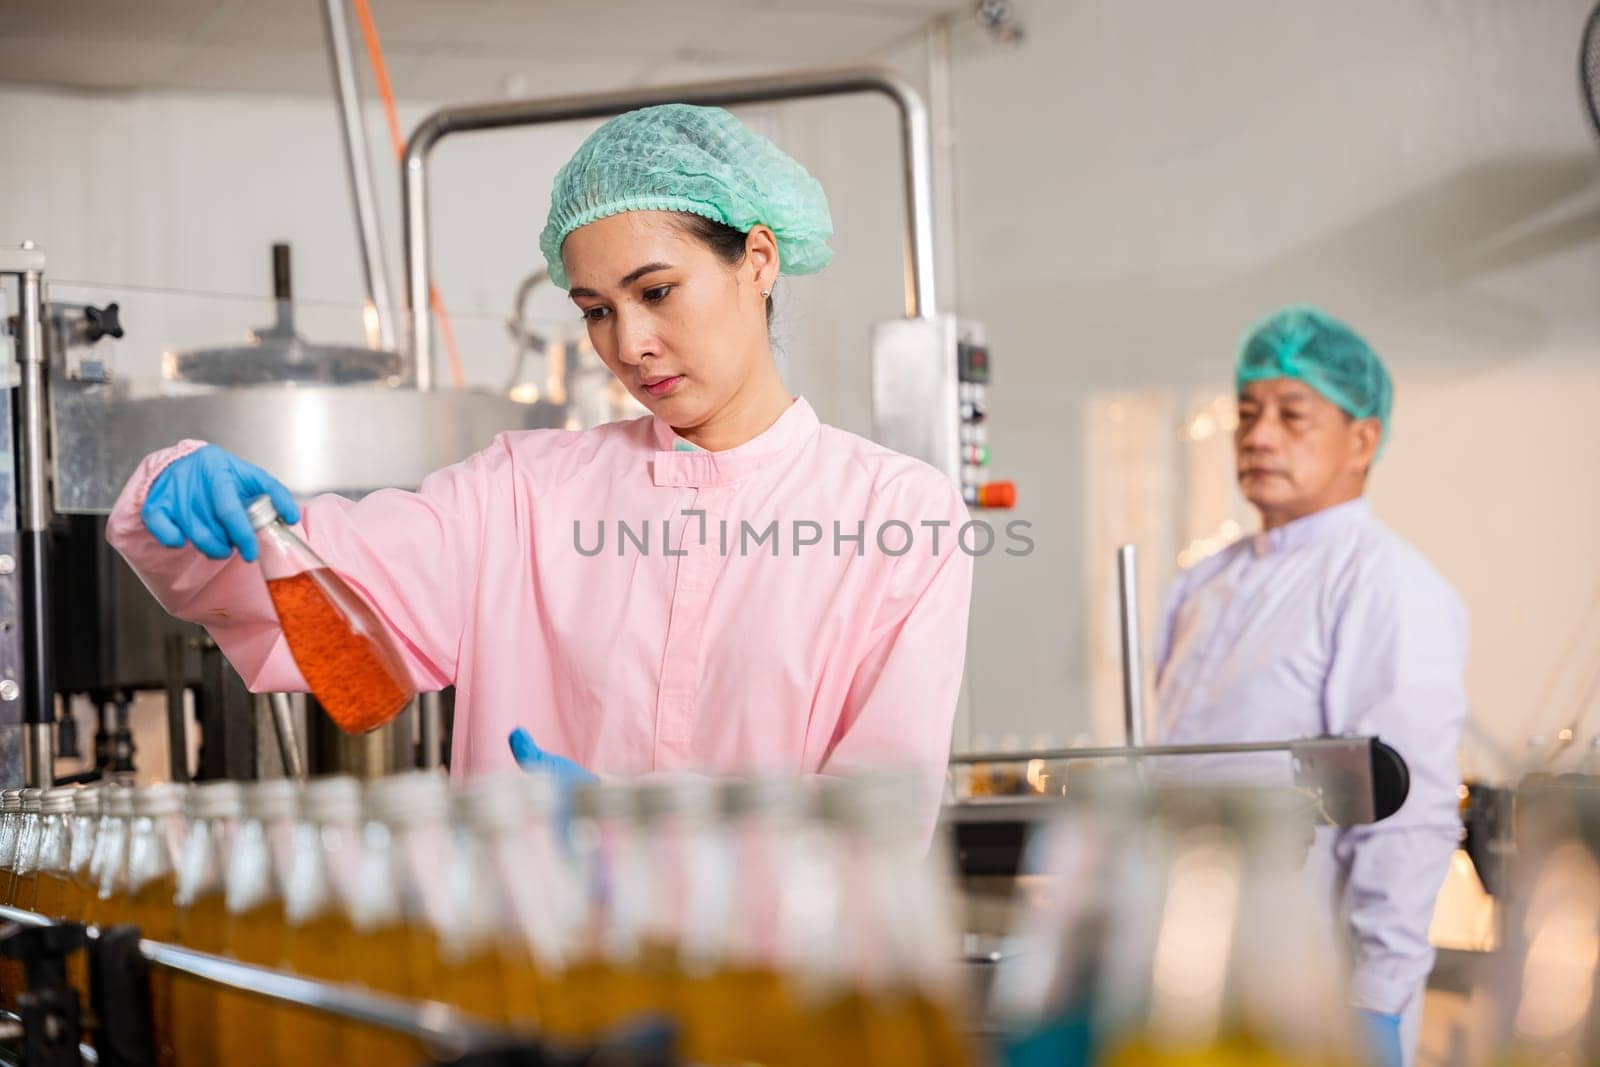 QC engineers inspect fruit juice drink production in glass bottles at the factory. Their careful examination ensures the highest quality and hygiene standards in manufacturing.